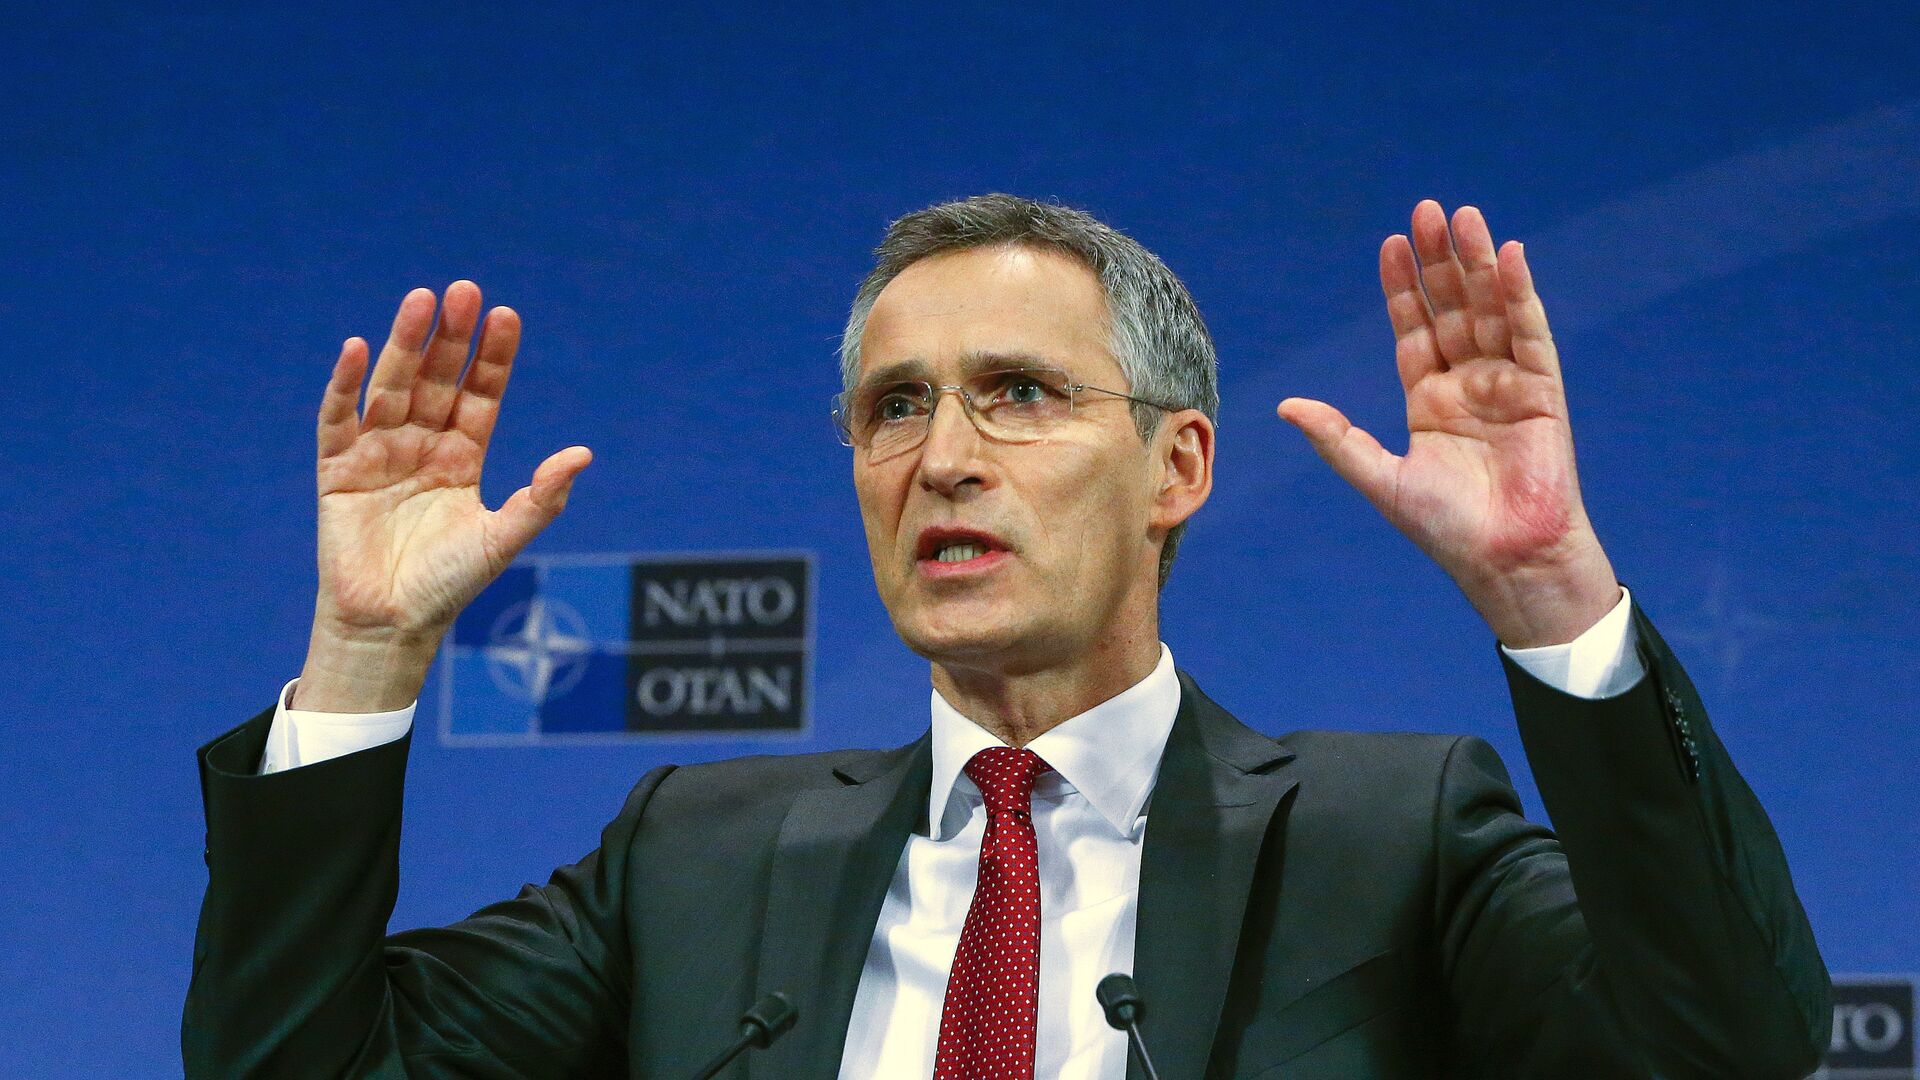 NATO Secretary General Jens Stoltenberg gestures during a news conference ahead of a NATO defence ministers meeting, which will be held on 10-11 February at the Alliance's headquarters in Brussels, Belgium February 9, 2016. - Sputnik International, 1920, 09.02.2022